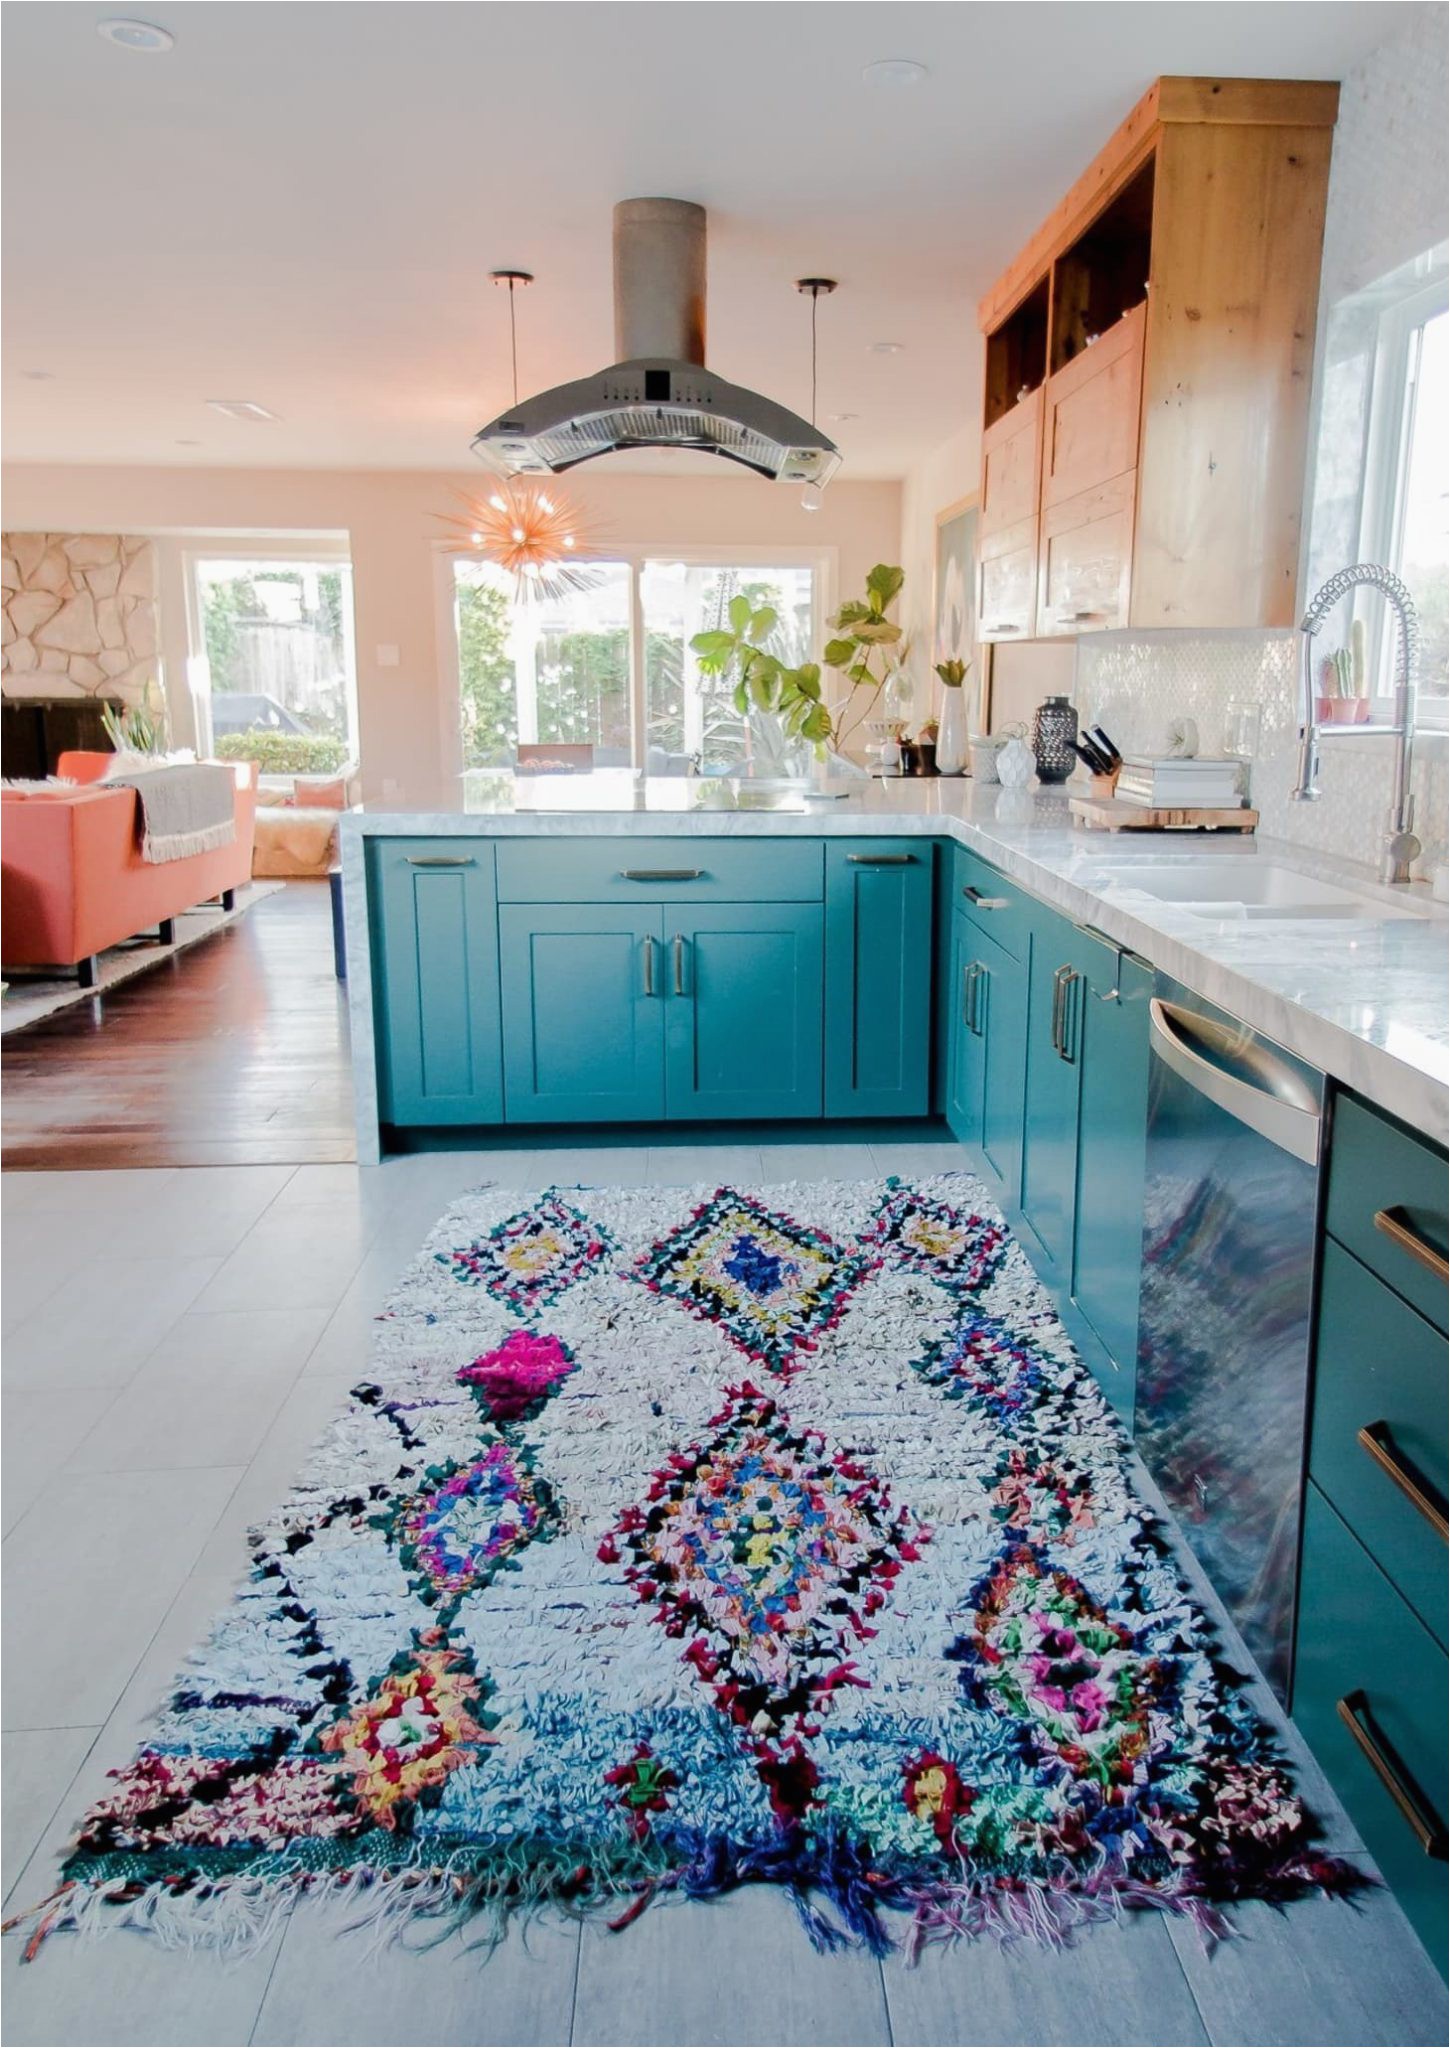 Best Rugs for Kitchen area 10 Best area Rugs for Kitchen with Beautiful Designs Home